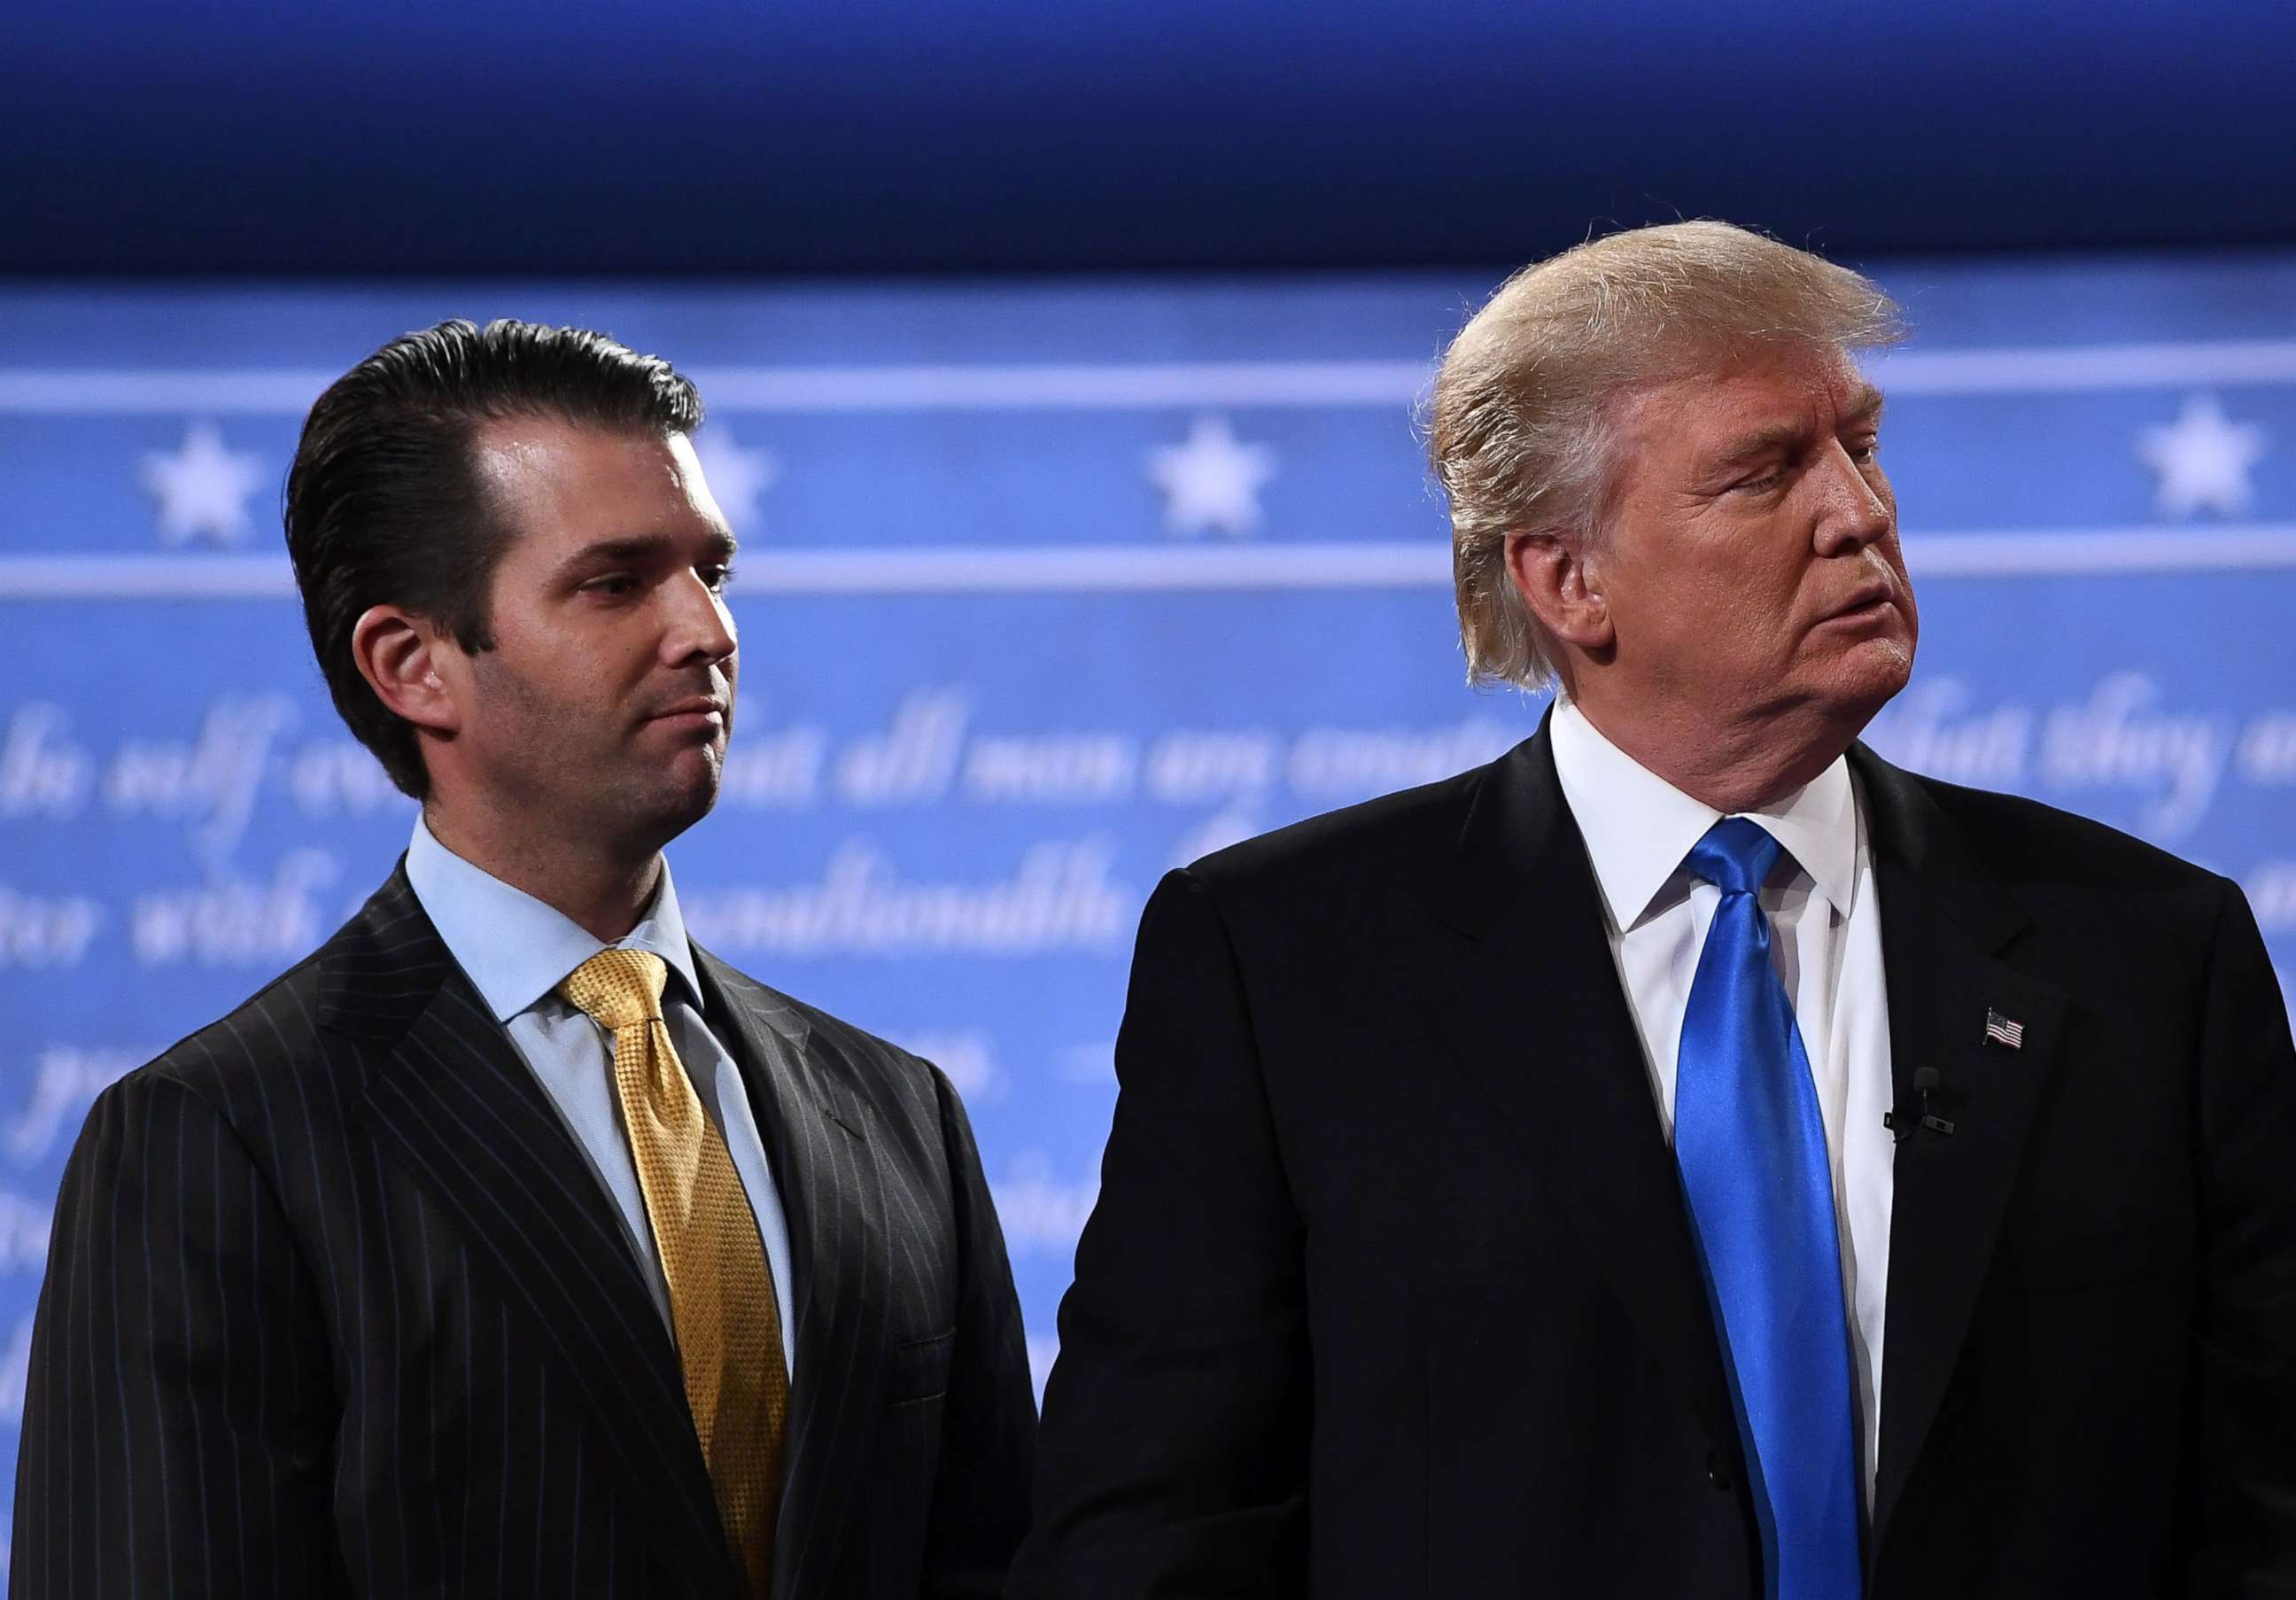 PHOTO: Donald Trump, right, standing with his son Donald Trump Jr. after the first presidential debate at Hofstra University in Hempstead, N.Y., July 10, 2017.